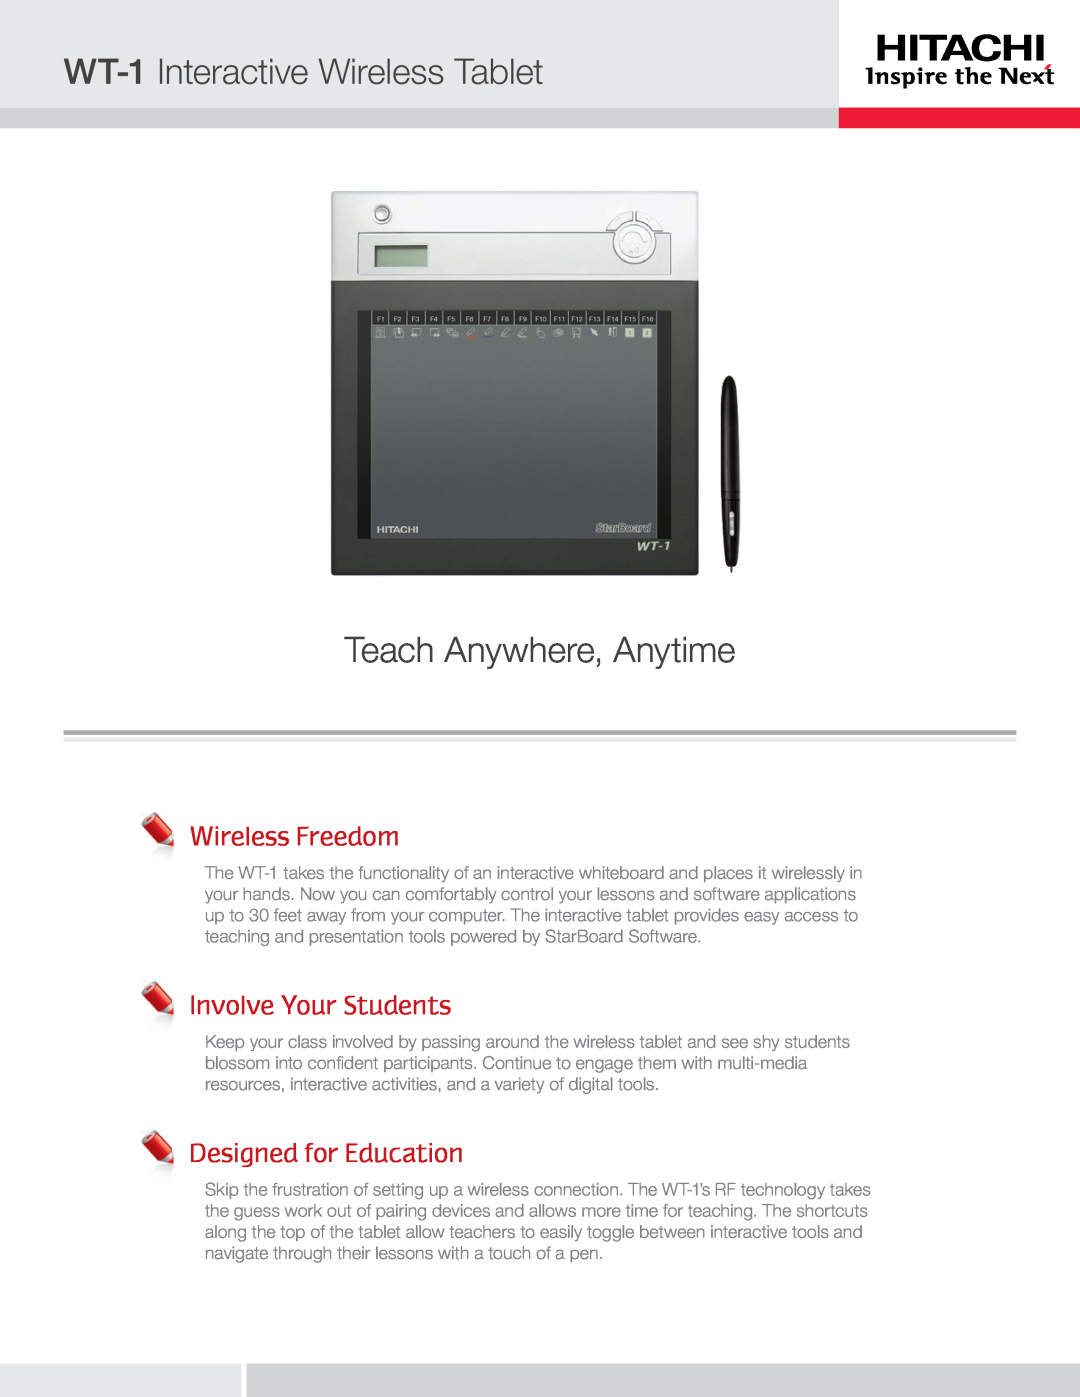 Hitachi manual Wireless Freedom, Involve Your Students, Designed for Education, WT-1 Interactive Wireless Tablet 